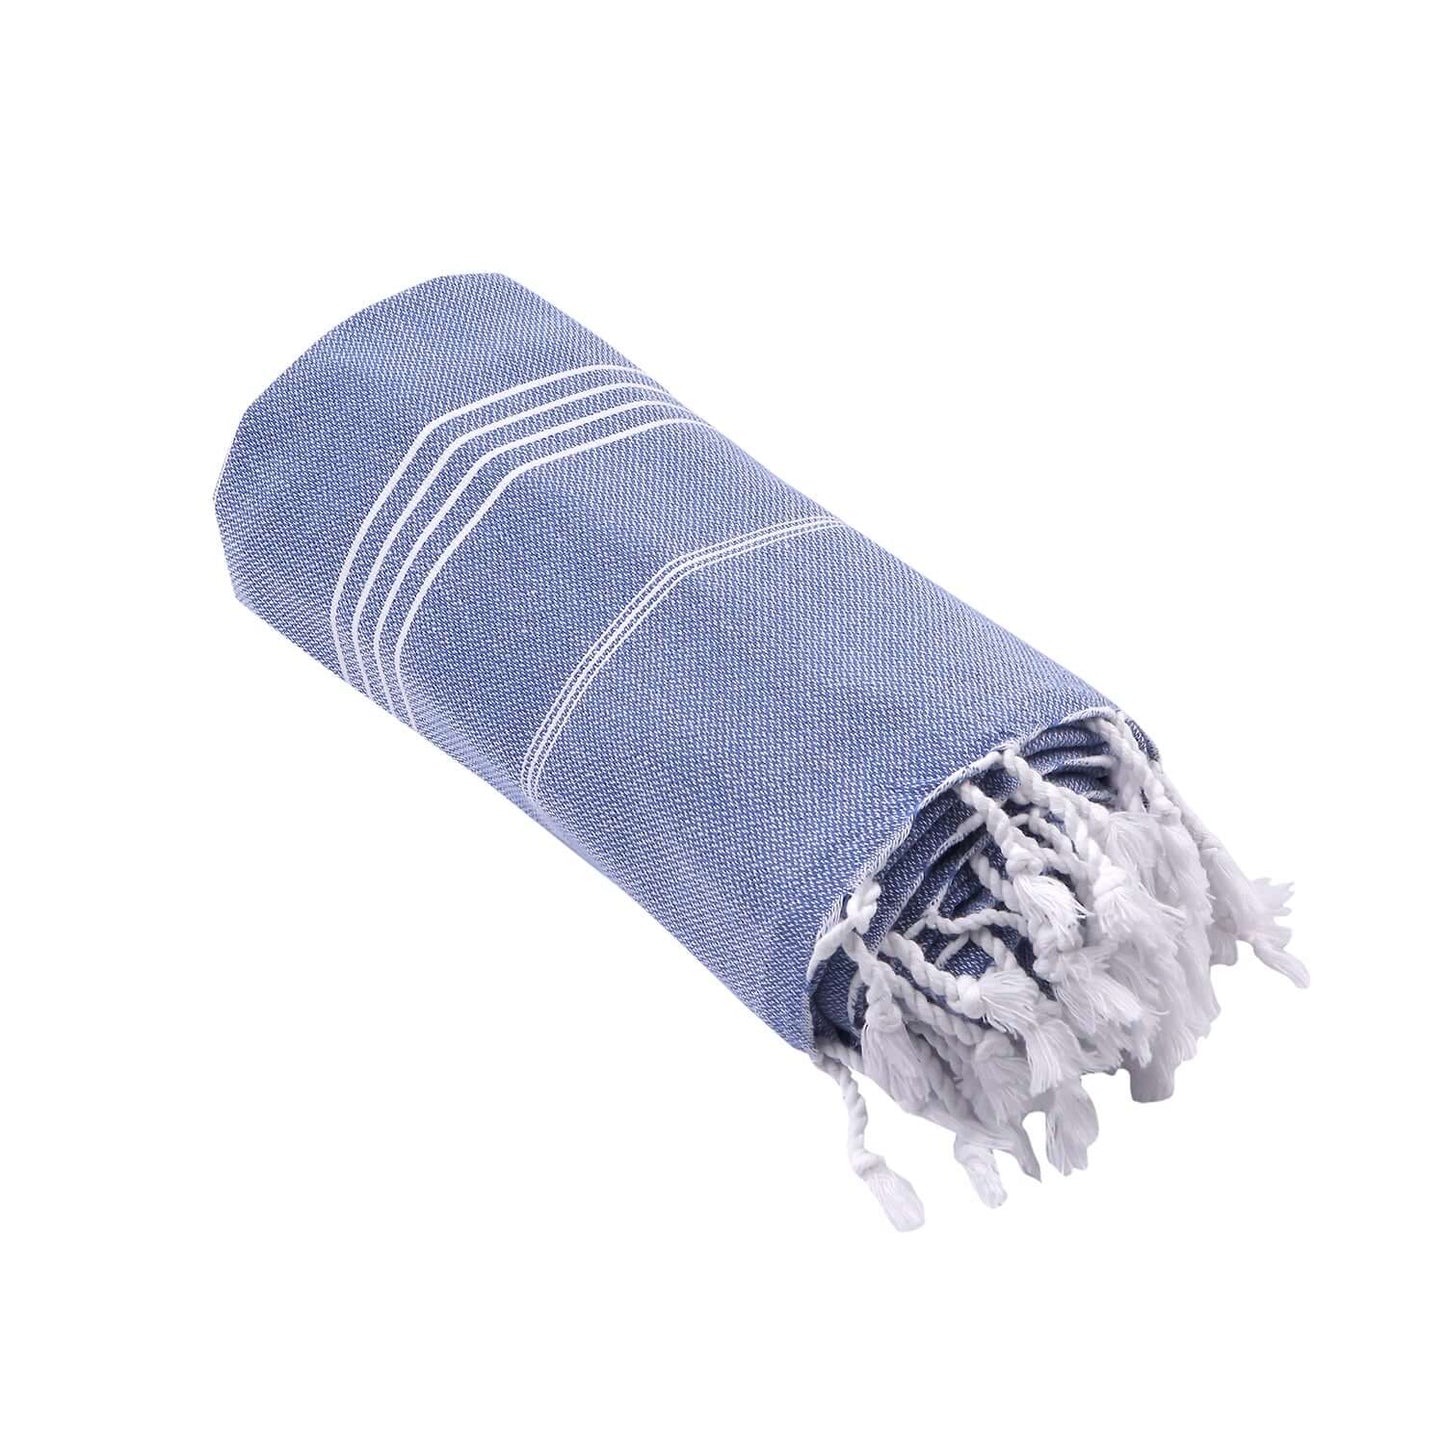 Rolled-up Loom Legacy dark blue beach towel with subtle white vertical stripes. One end of the towel showcases fringed white tassels, all presented against a white background.